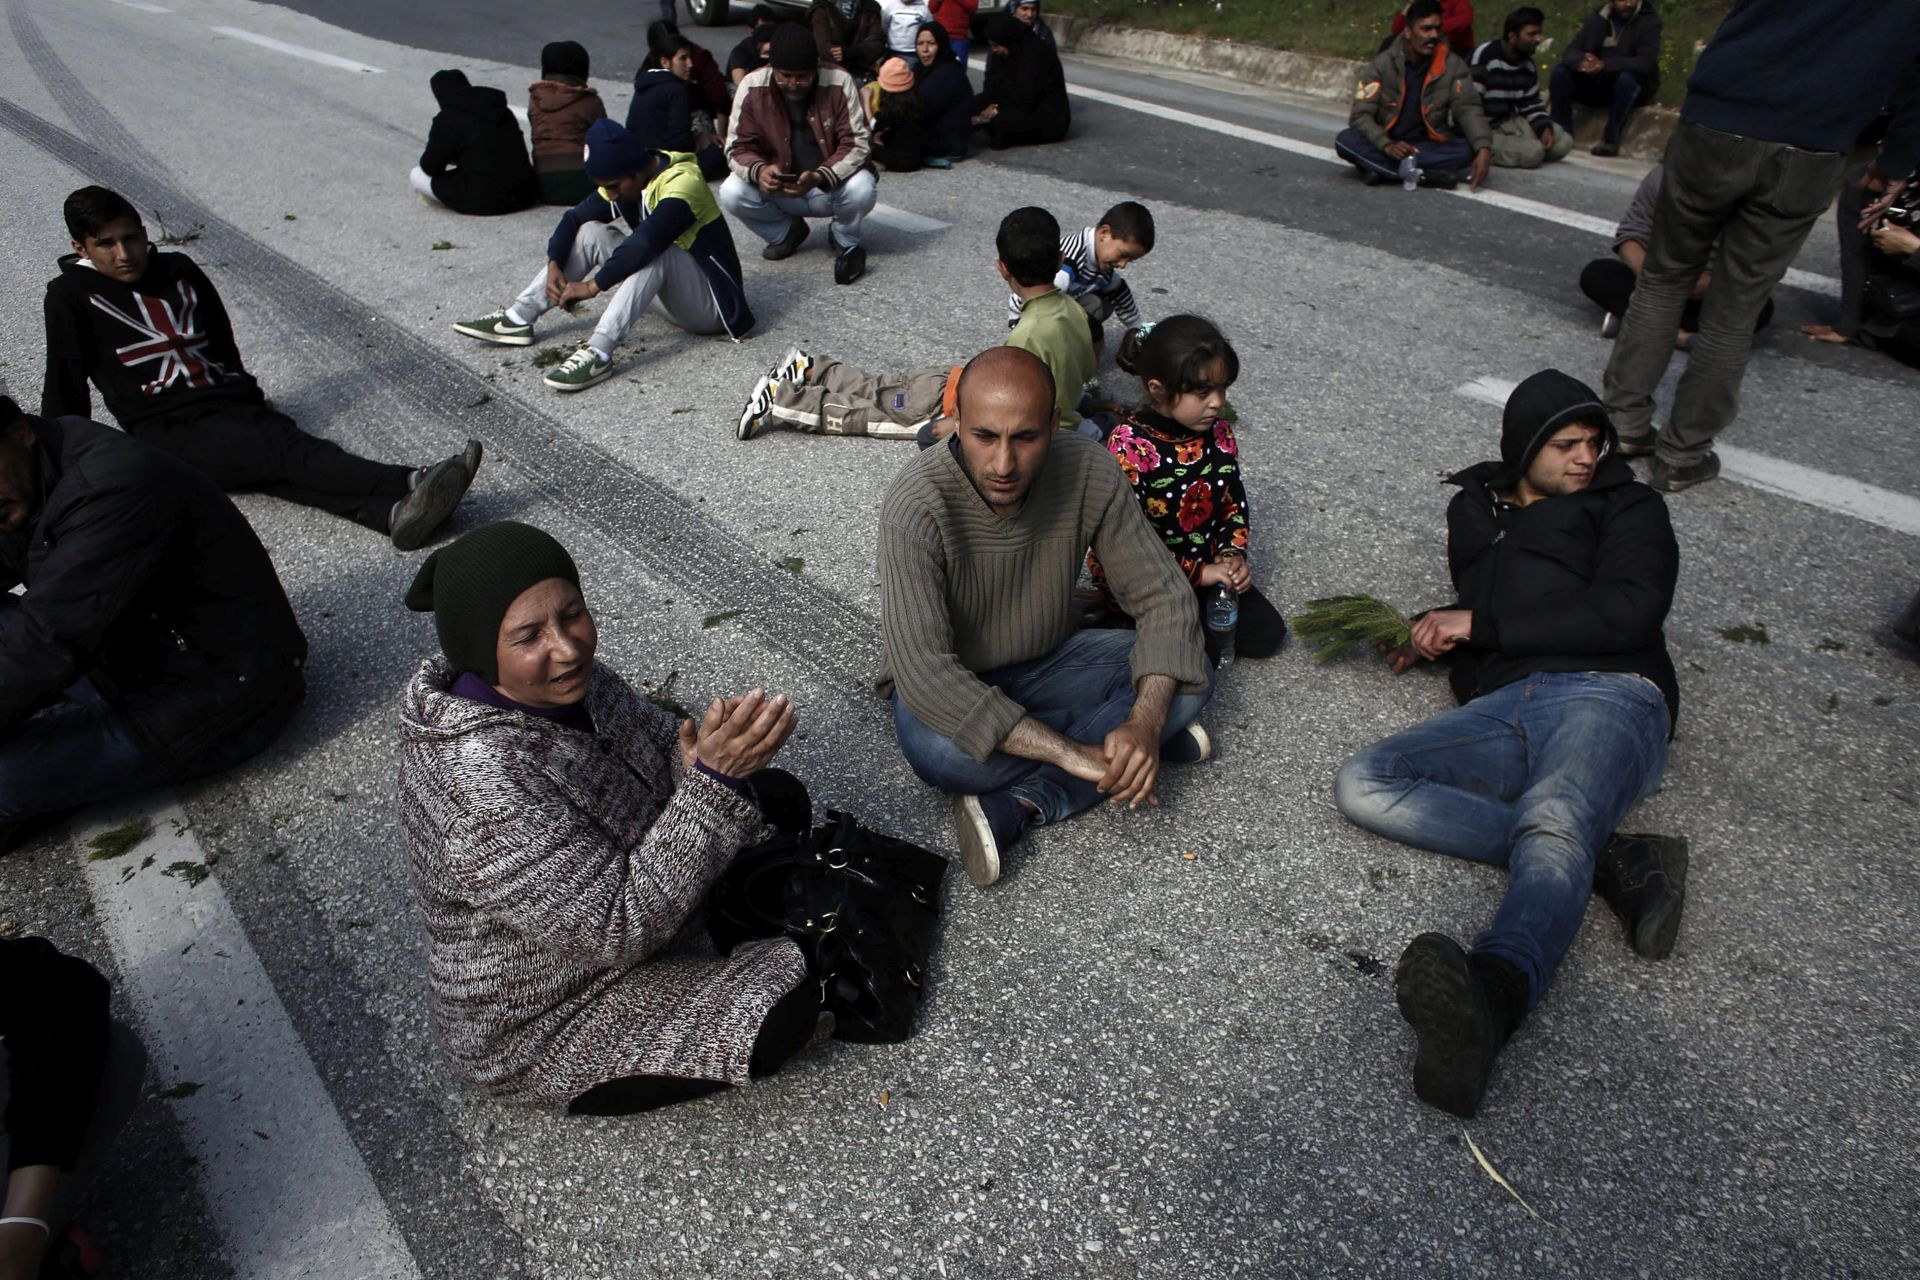 epa05233800 Refugees and migrants block the highway to the border crossing of Evzoni during a protest demanding the opening of the borders near the borders between Greece and FYR of Macedonia,  in northern Greece on 28 March 2016. Migration restrictions along the so-called Balkan route, the main path for migrants and refugees from the Middle East into the European Union, has left thousands of migrants trapped in Greece.  EPA/KOSTAS TSIRONIS